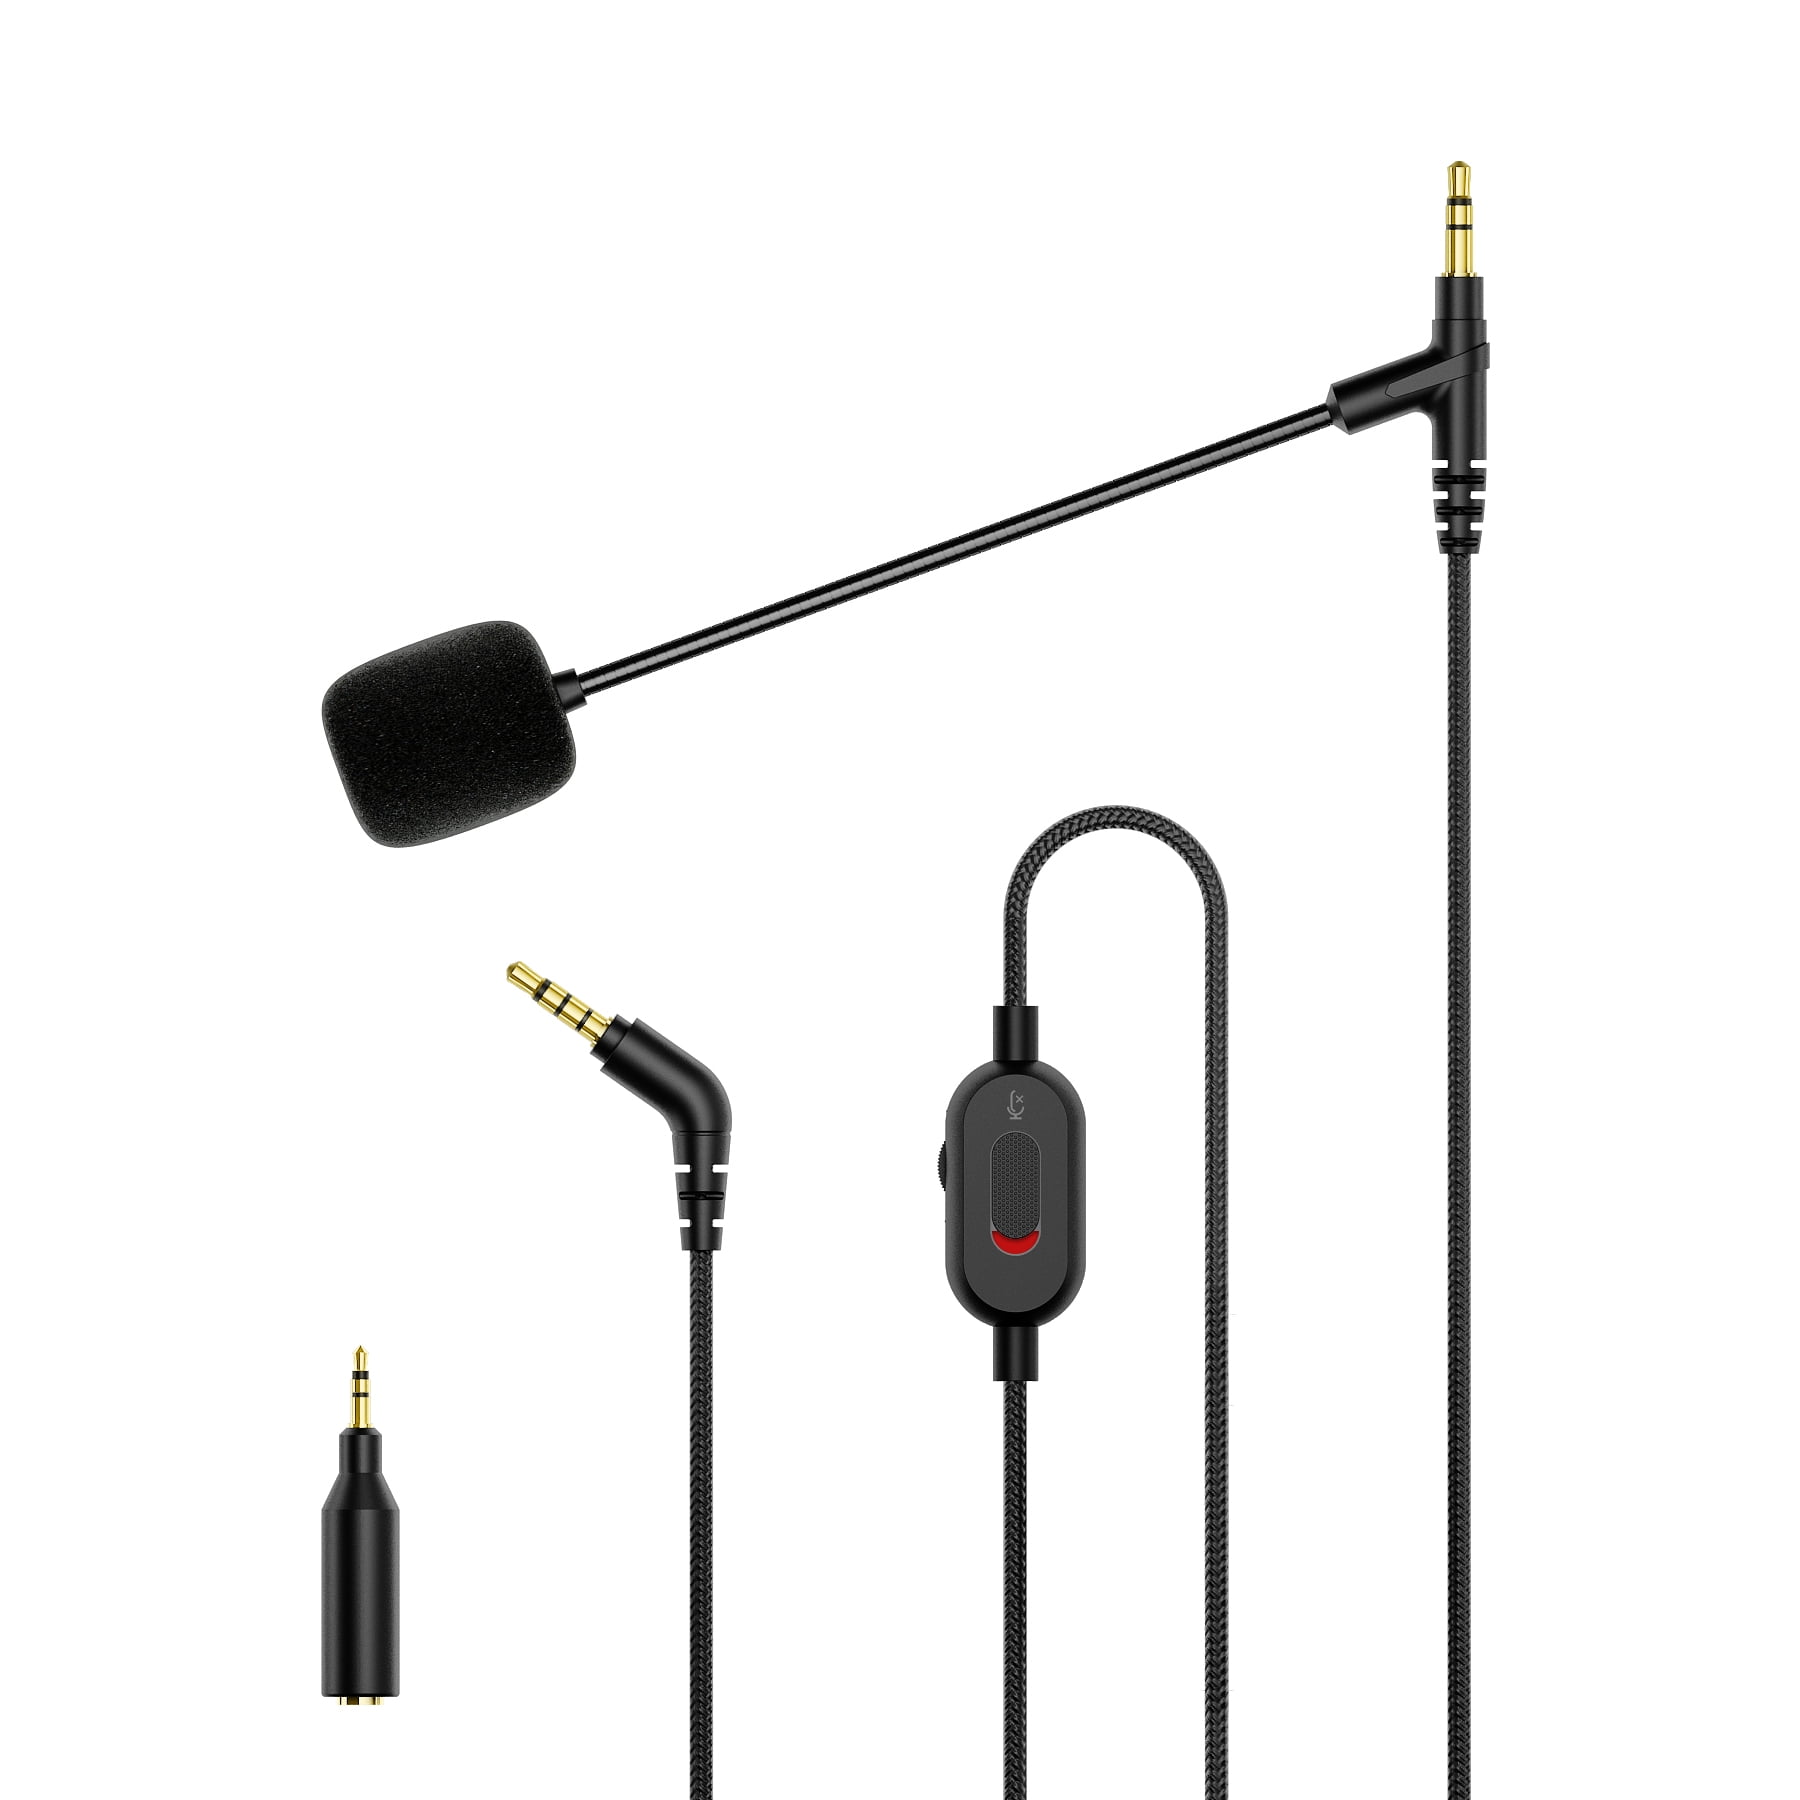 20 Audio Cable Vidpro XM-L Wired Lavalier Microphone Digital Camera External Microphone Compatible with Nikon Z 5 Mirrorless Digital Camera Transducer Type: Electret Condenser 